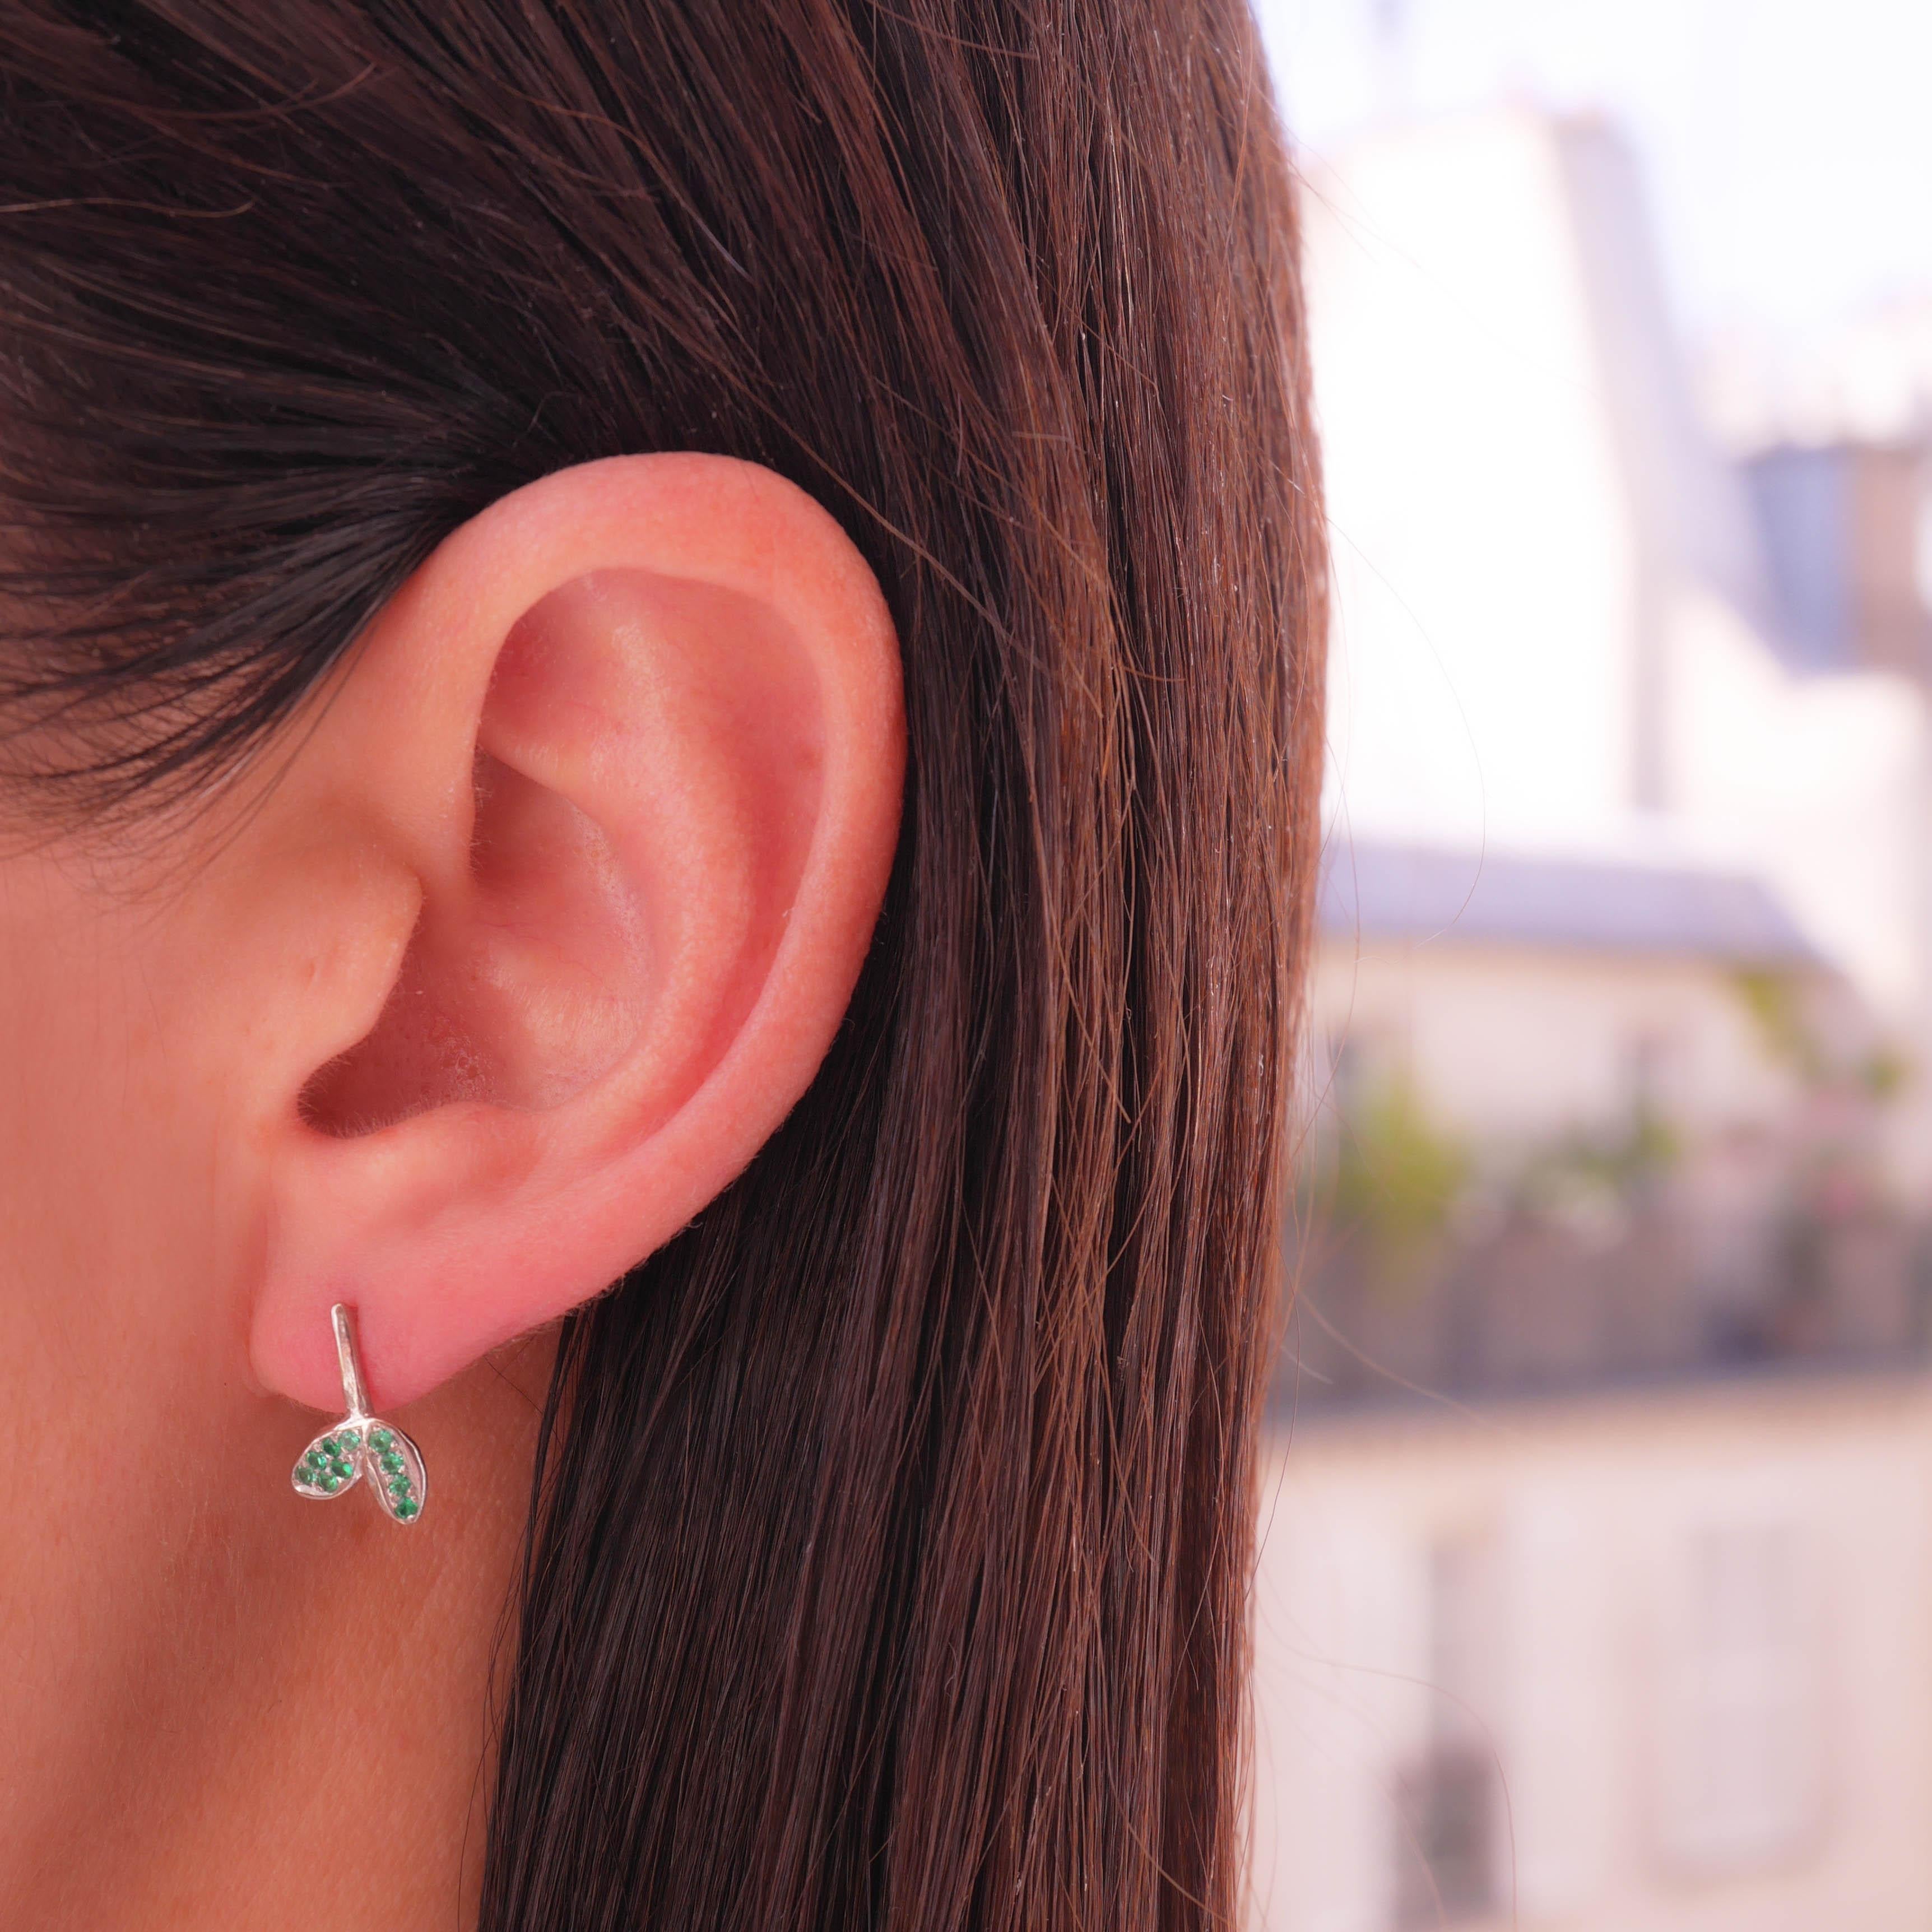 These Anais Rheiner handmade pair of 18 karat white gold earrings weigh approximately 2 grams. The earrings are set with emeralds and rubies and are asymmetrical with a butterfly fastening for pierced ears.
The craftsmanship is entirely hand made